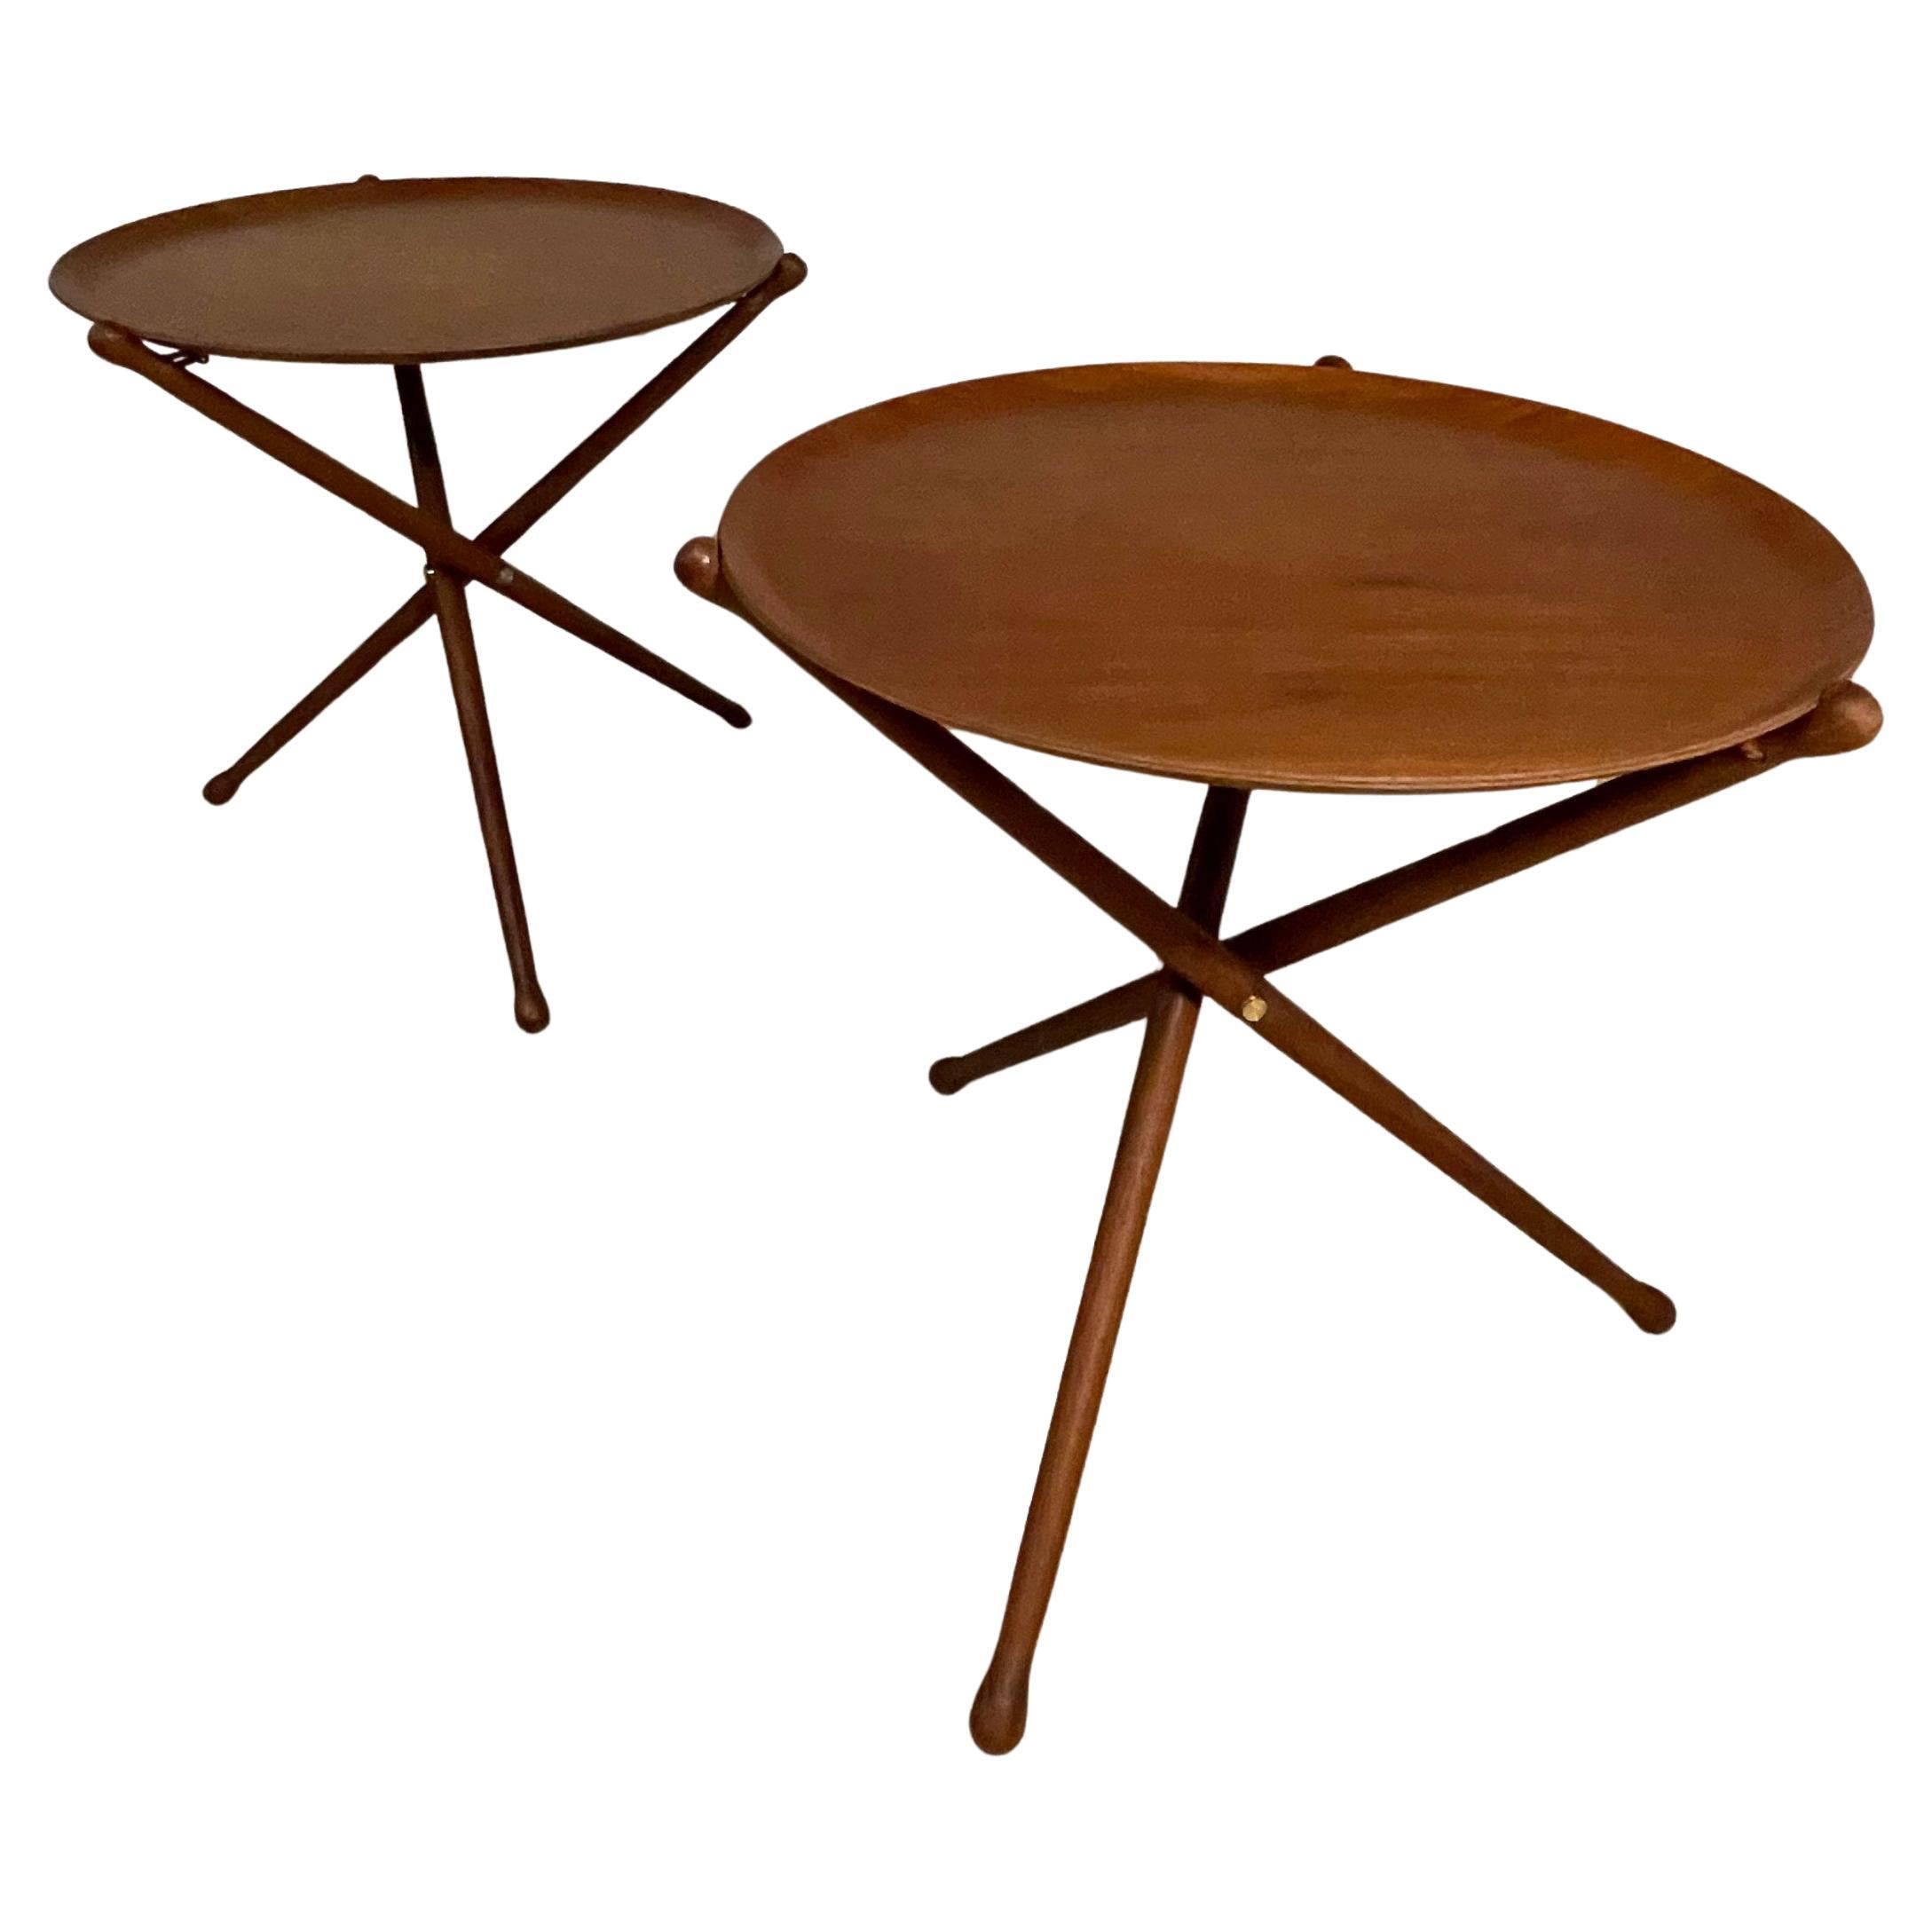 Pair Of Teak Folding Tray Tables By Nils Trautner For Ary Nybro, Sweden For Sale